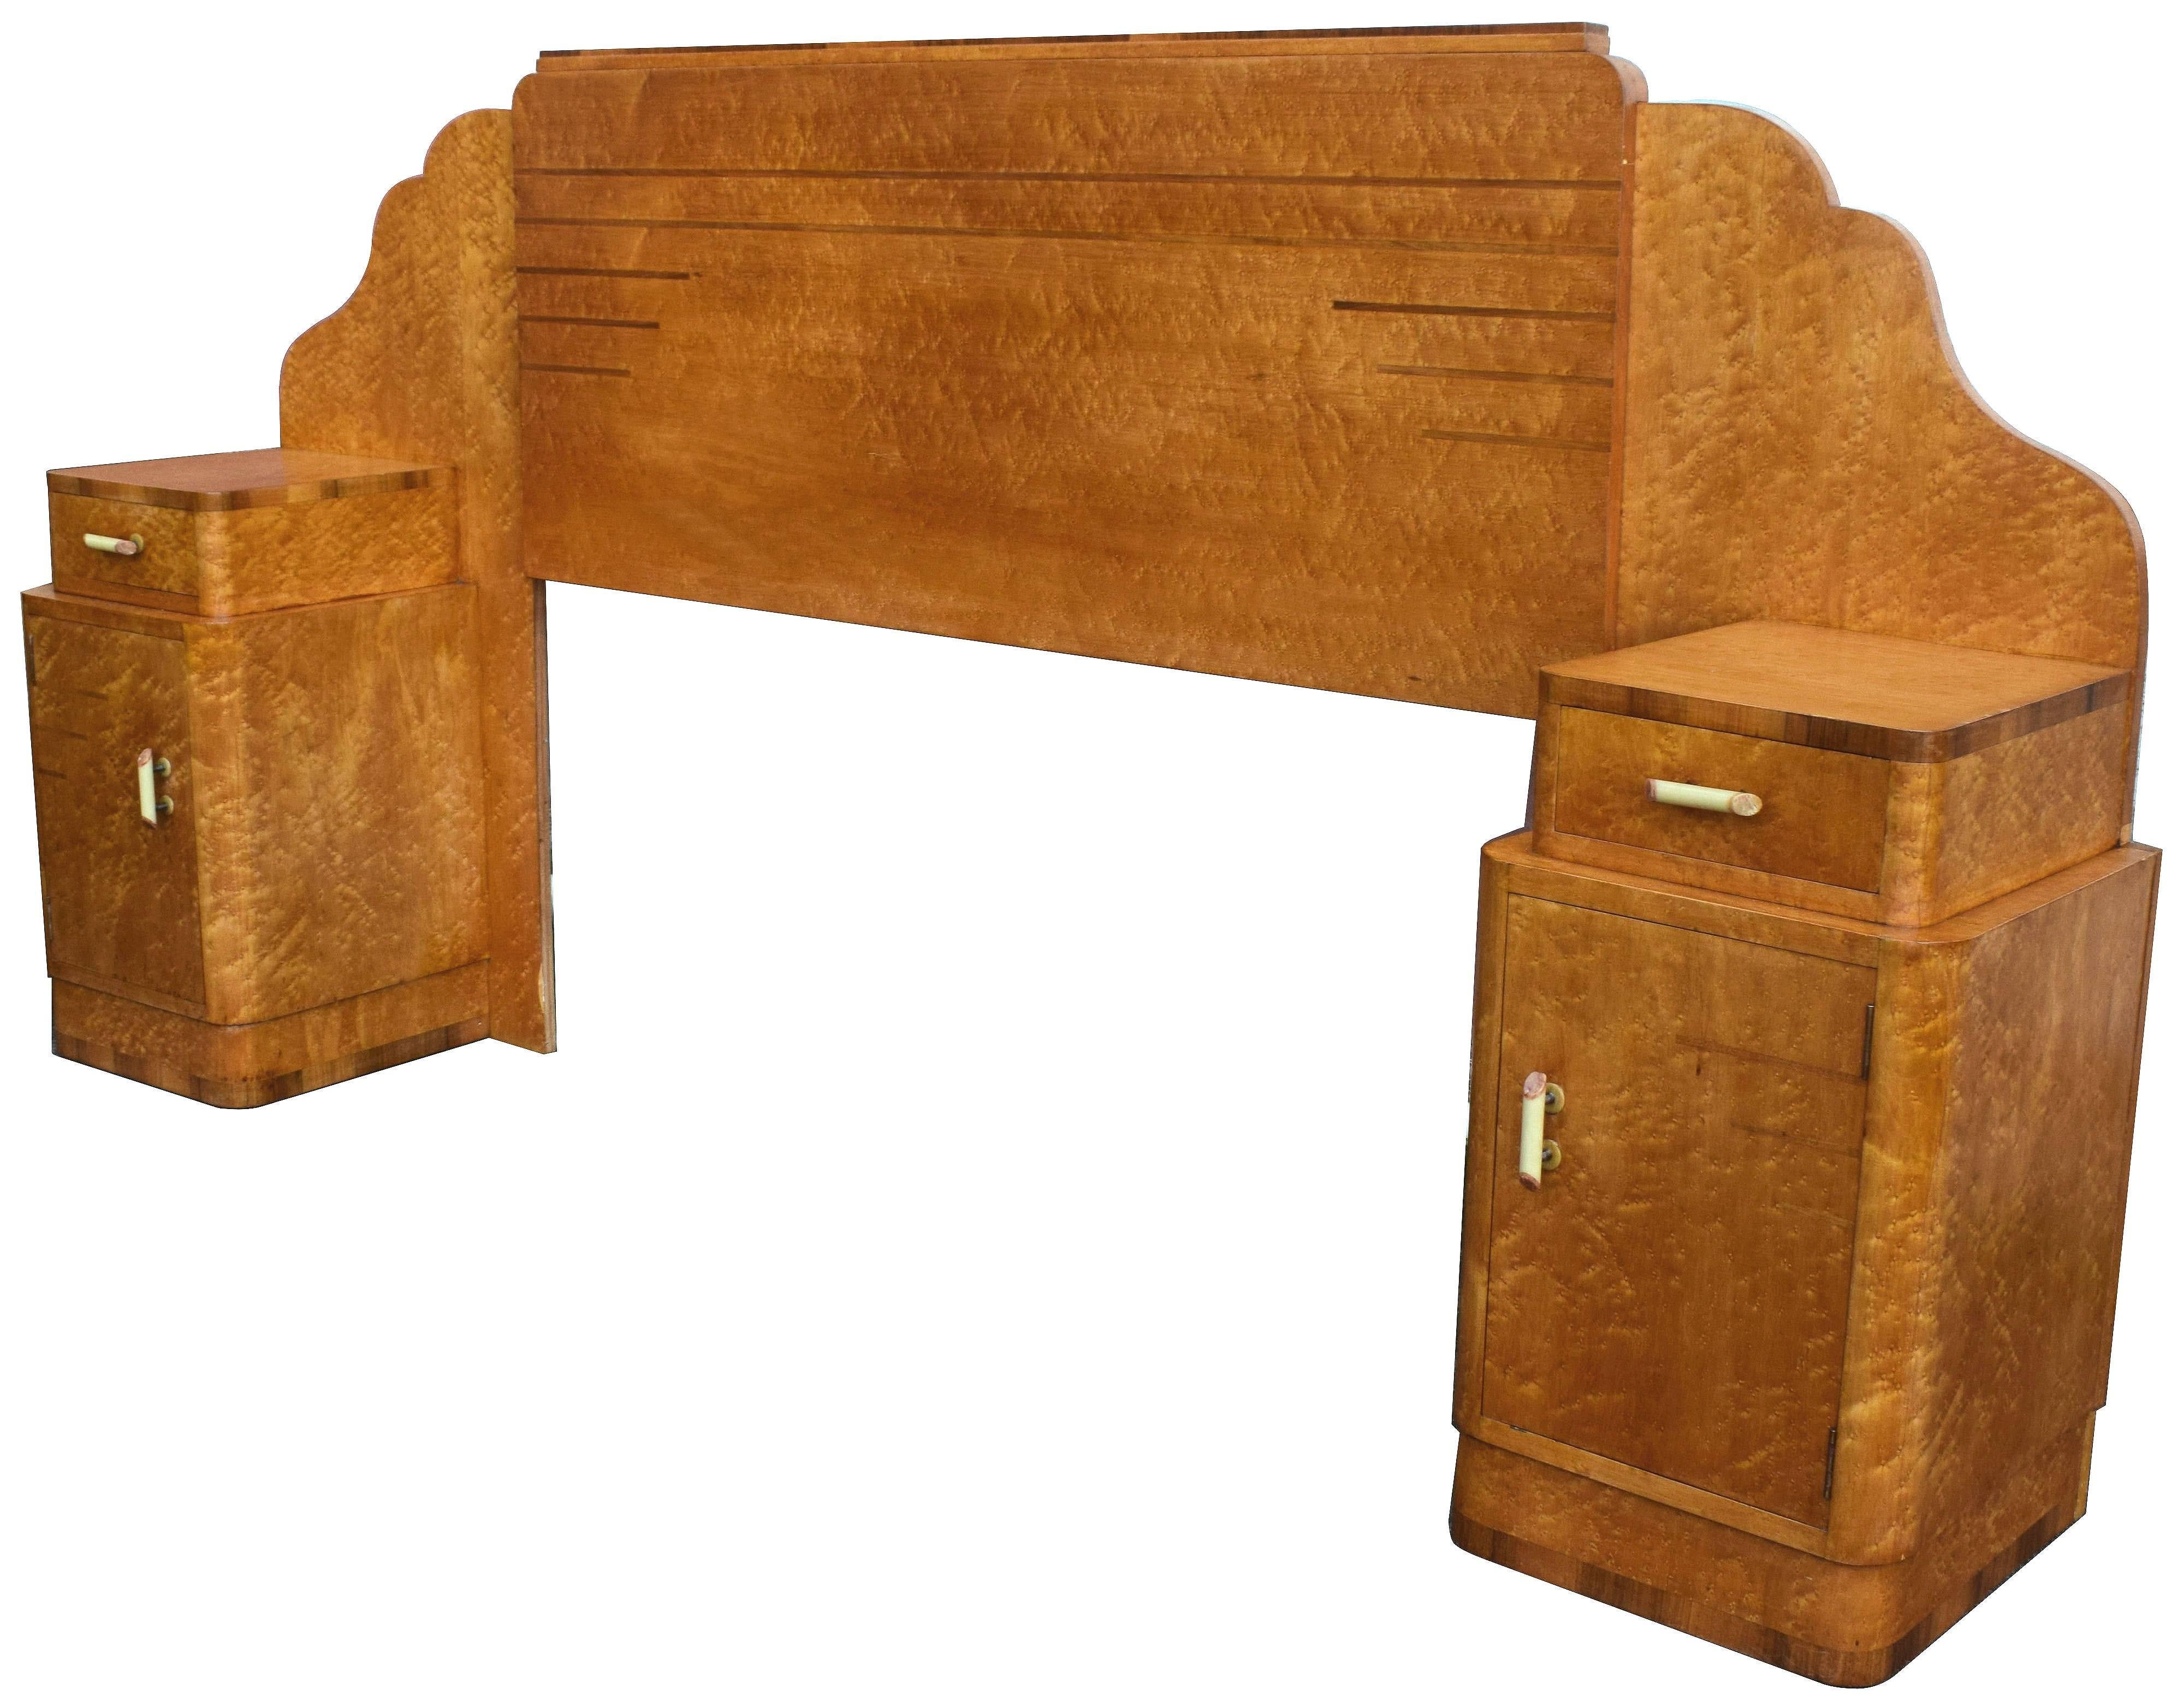 Wonderfully stylish and so indicative of this bygone era is this king-size bed. Veneered in bird's-eye Maple with walnut feather banding to eccentuate the cabinets and overall odeon or cloud shape. The blonde colouring would easily integrate this